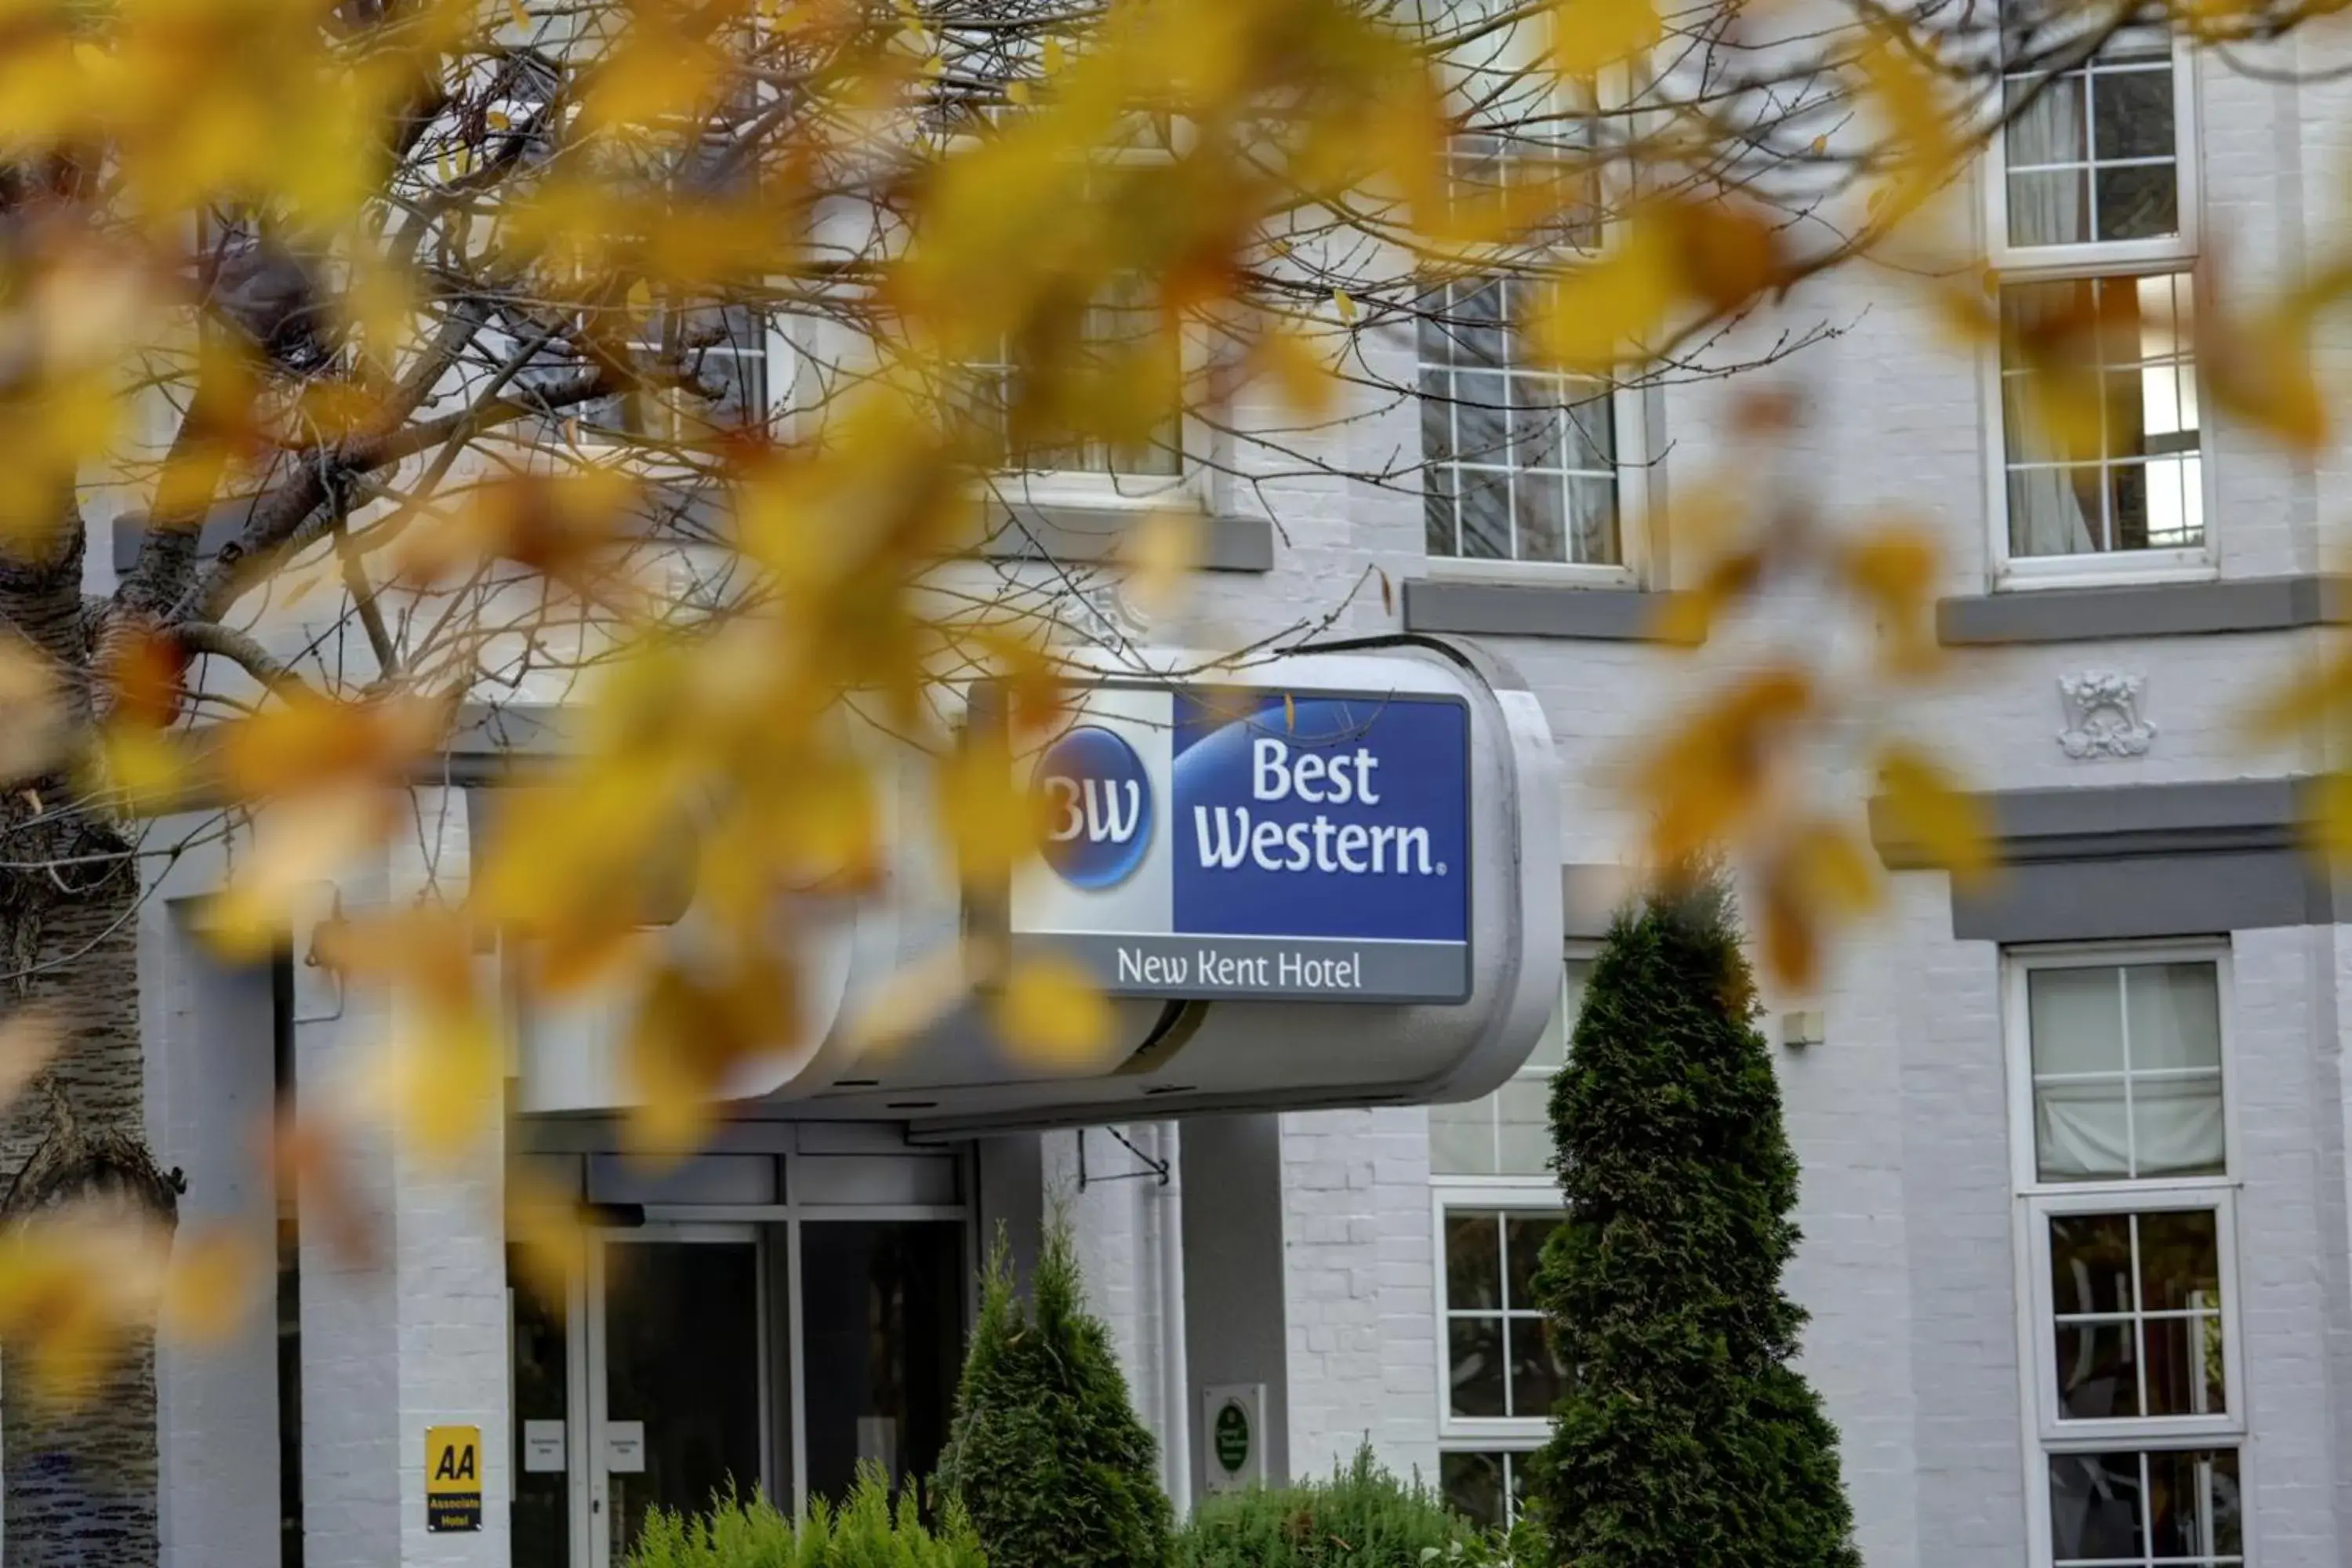 Property Building in Best Western New Kent Hotel